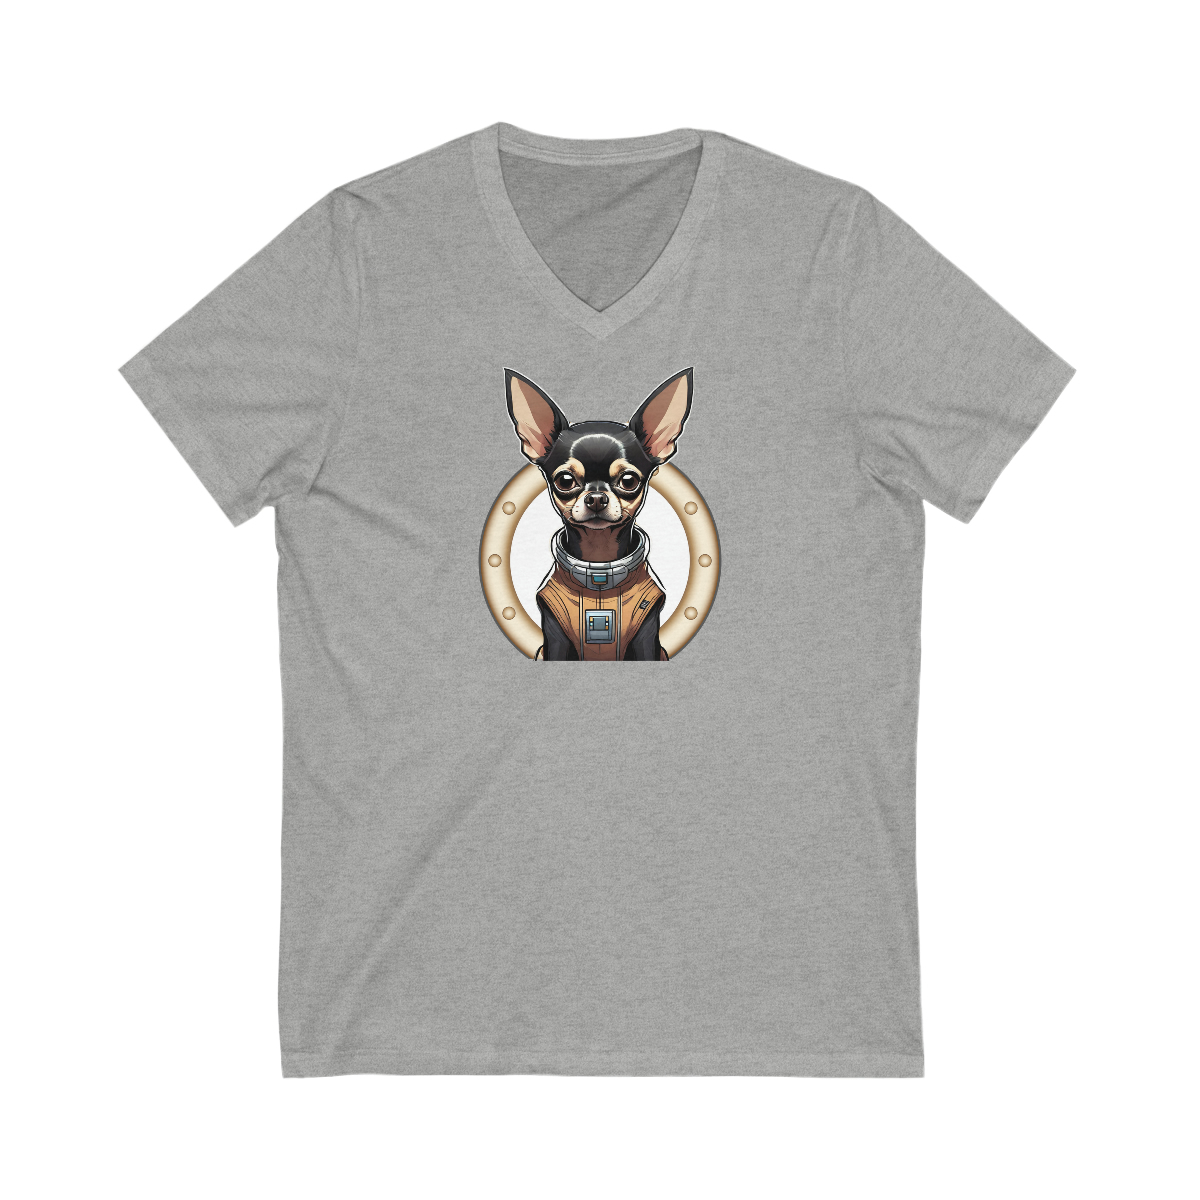 Unisex Jersey Short Sleeve V-Neck Tee with Cute Chihuahua Astronaut Design